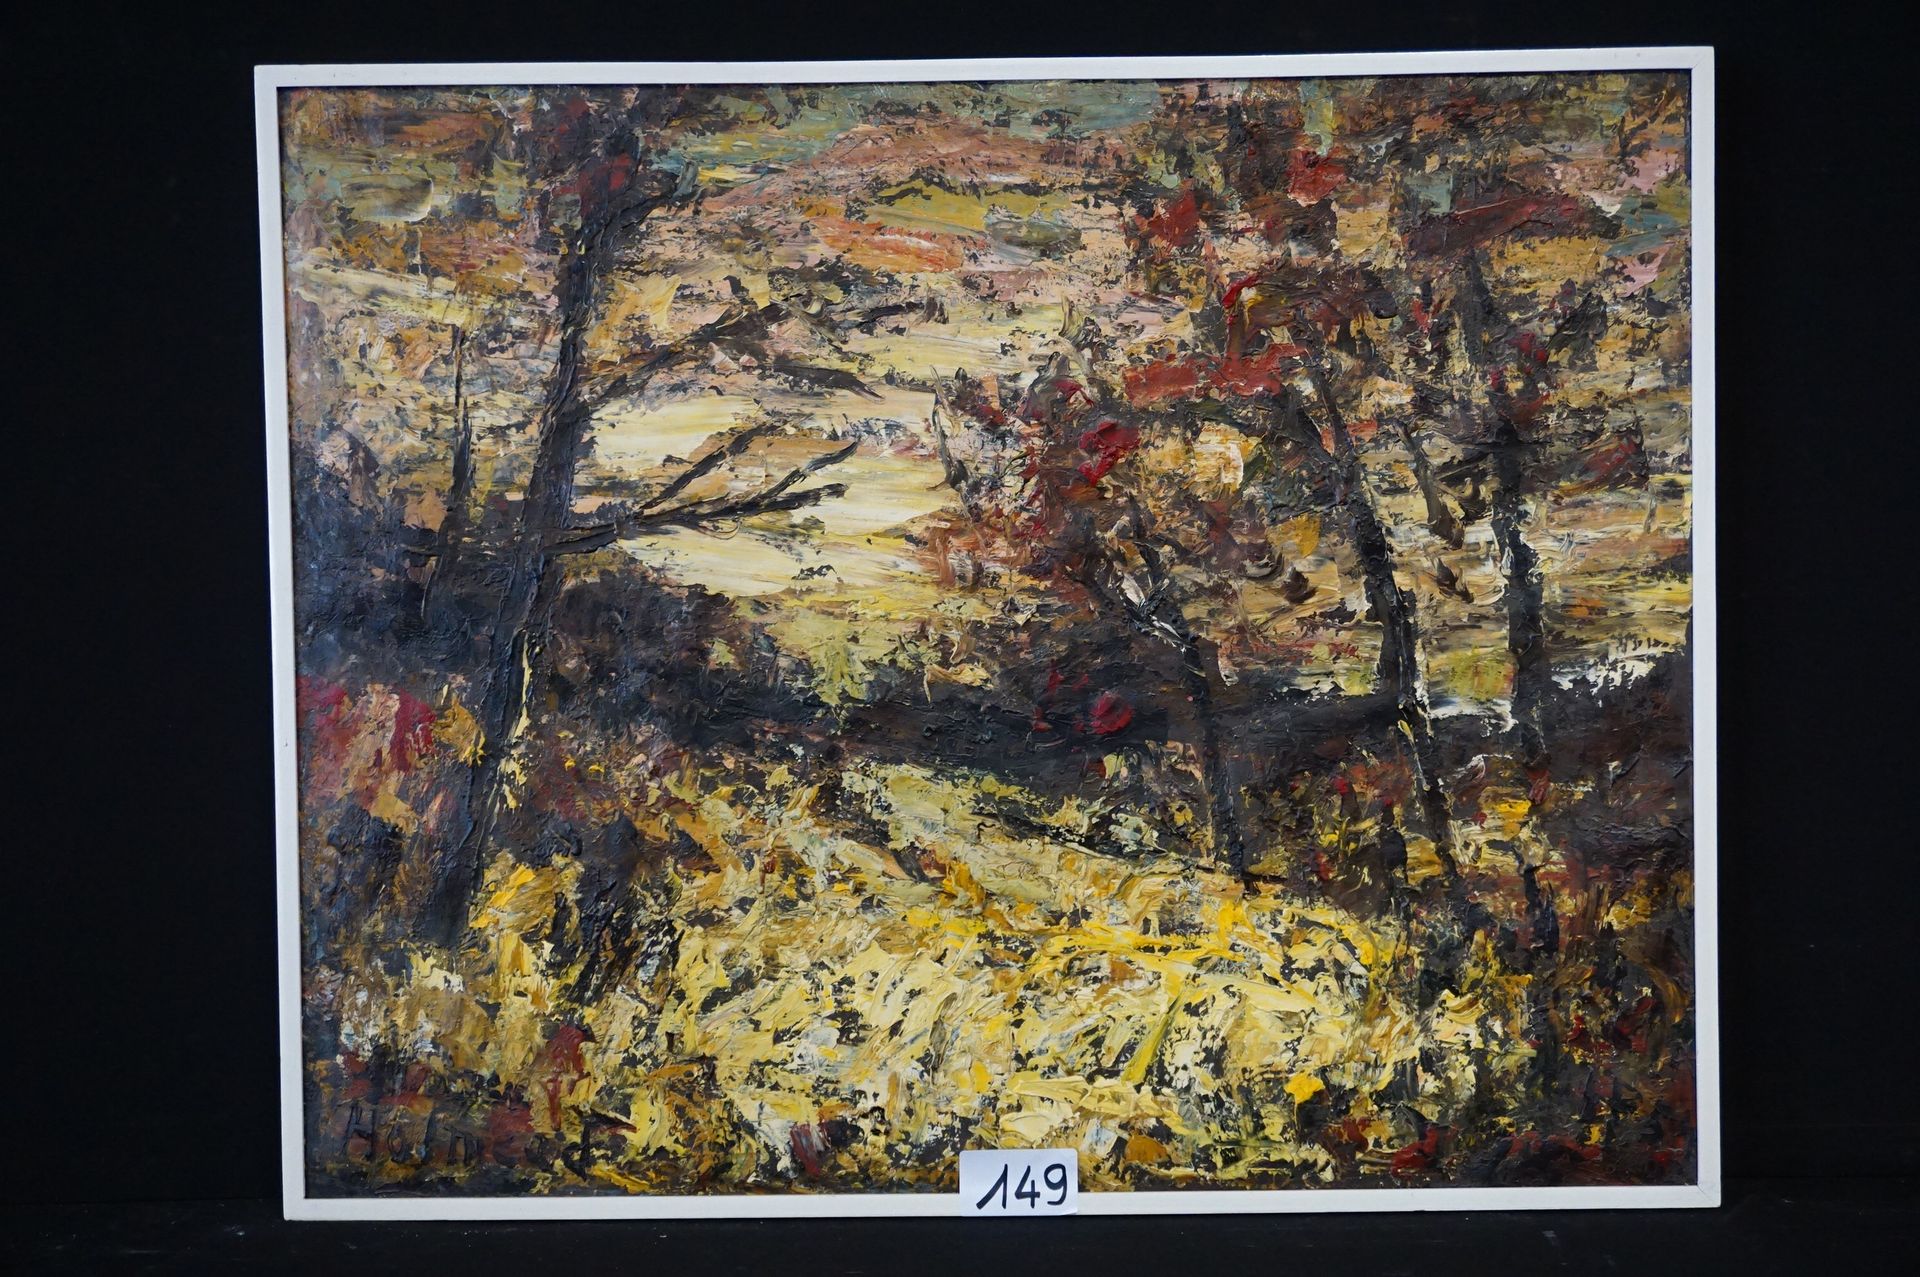 CLIFFORD HOLMEAD PHILIPS (1889 - 1975) "Automne" - Oil on canvas - Signed 60 x 7&hellip;